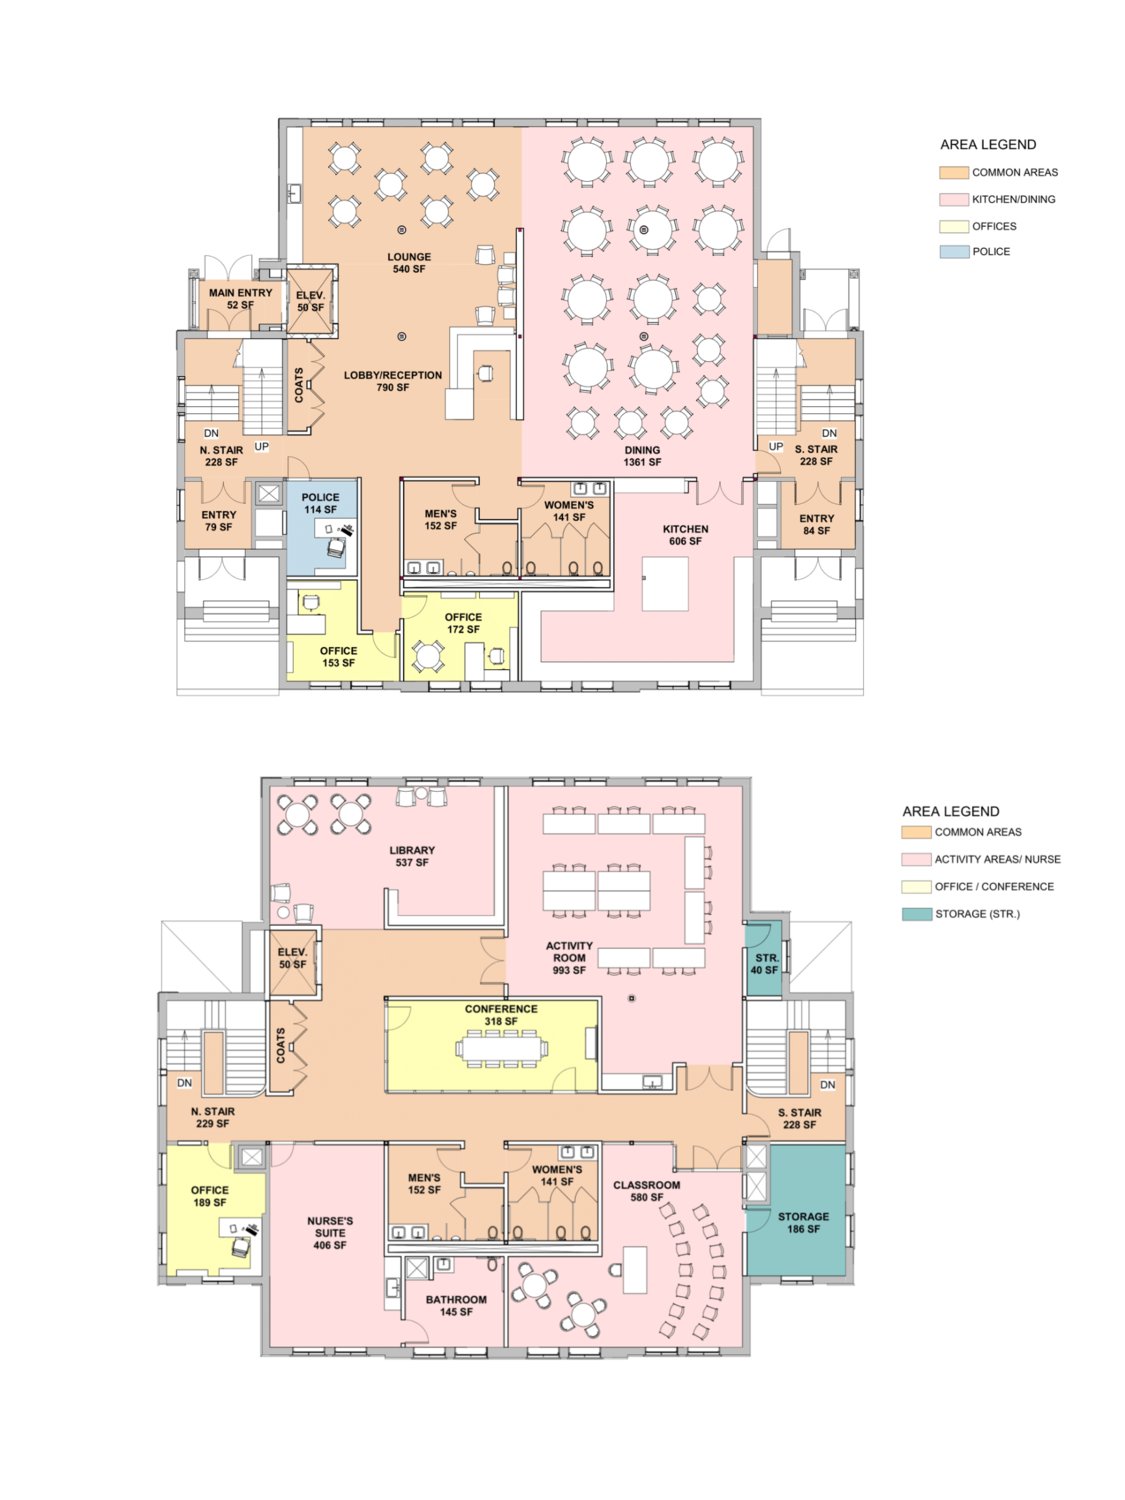 Floor plans showing the first floor (top image), and second floor (bottom image) show the variety of rooms outlined in the Town’s plans for the redesigned and refurbished Walley School, which would provide space for a wide variety of community activities.